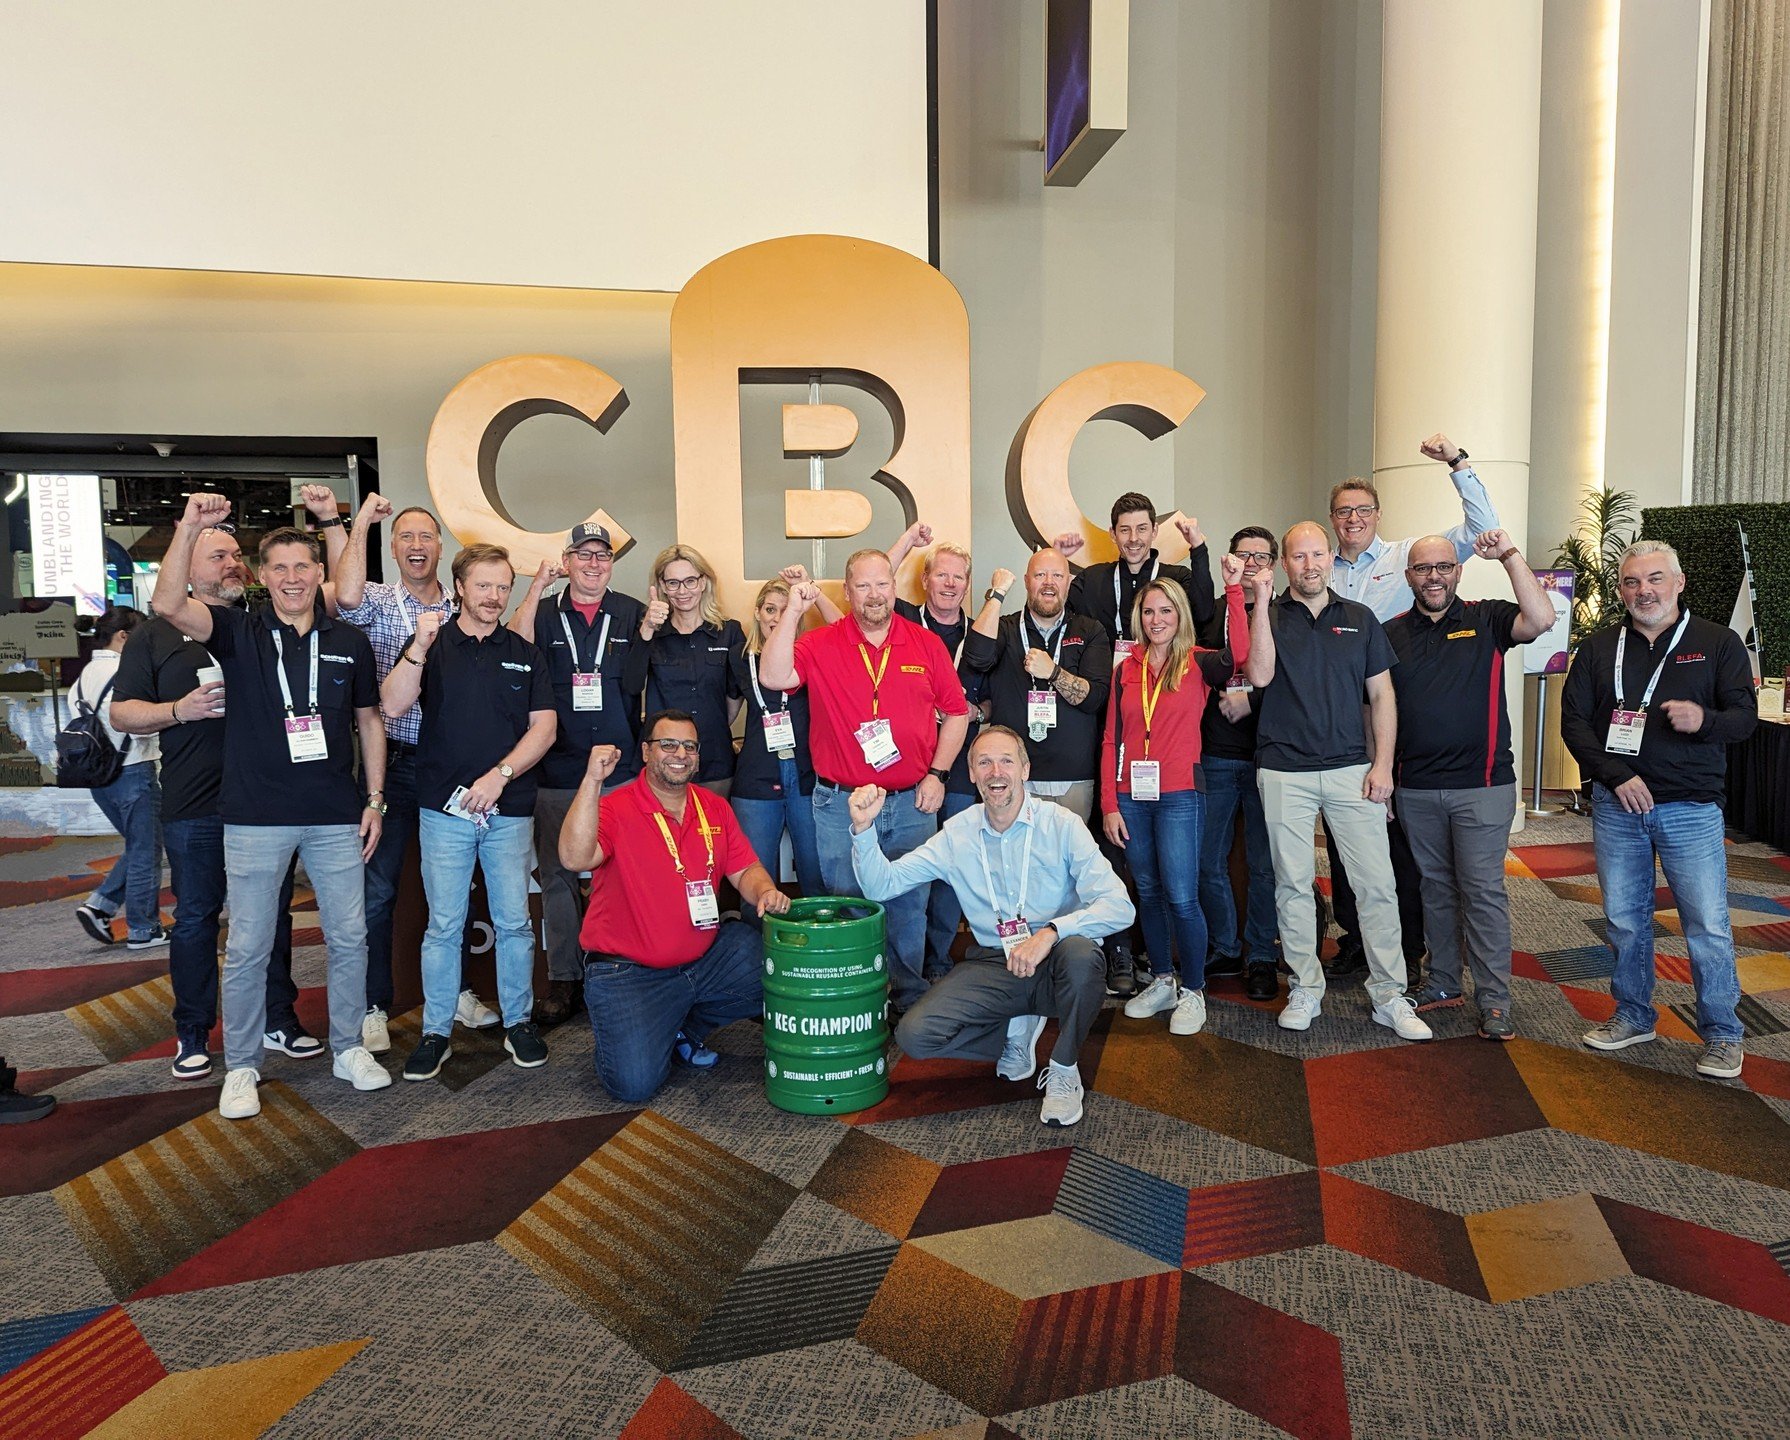 The dream team are back together at #CraftBrewersCon in #LasVegas. 
We enjoyed raising draft pints with old and new friends. Cheers to a more sustainable future. 🍻
⁠
#sustainability #circulareconomy #CBC2024 ⁠ #drinkdraft

@brewersassoc @micromaticu